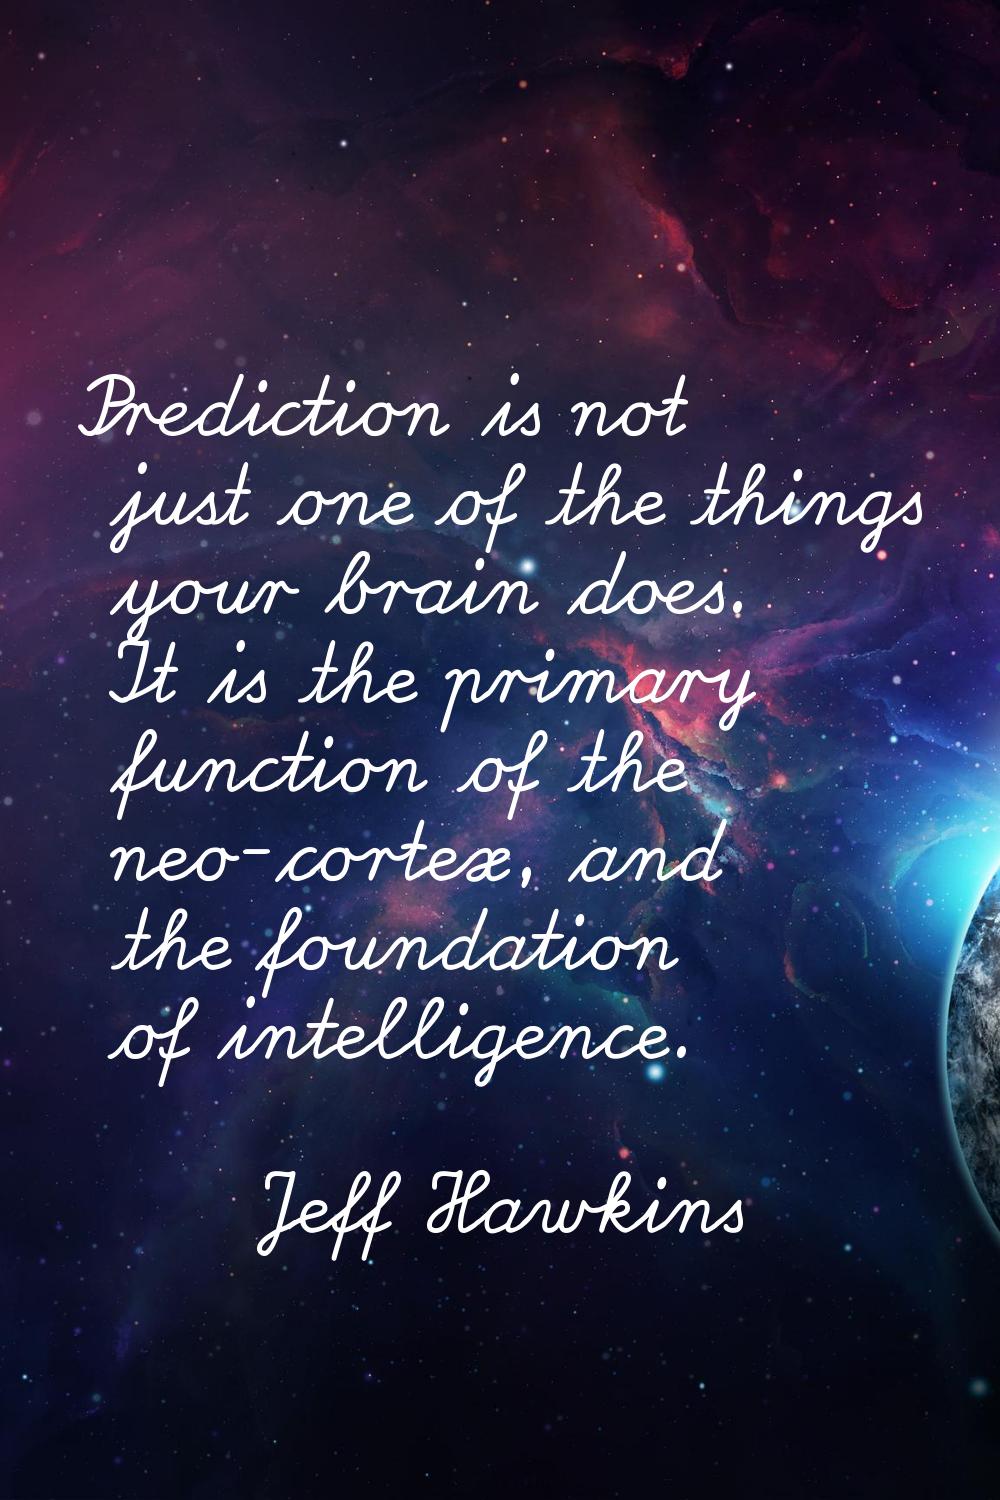 Prediction is not just one of the things your brain does. It is the primary function of the neo-cor